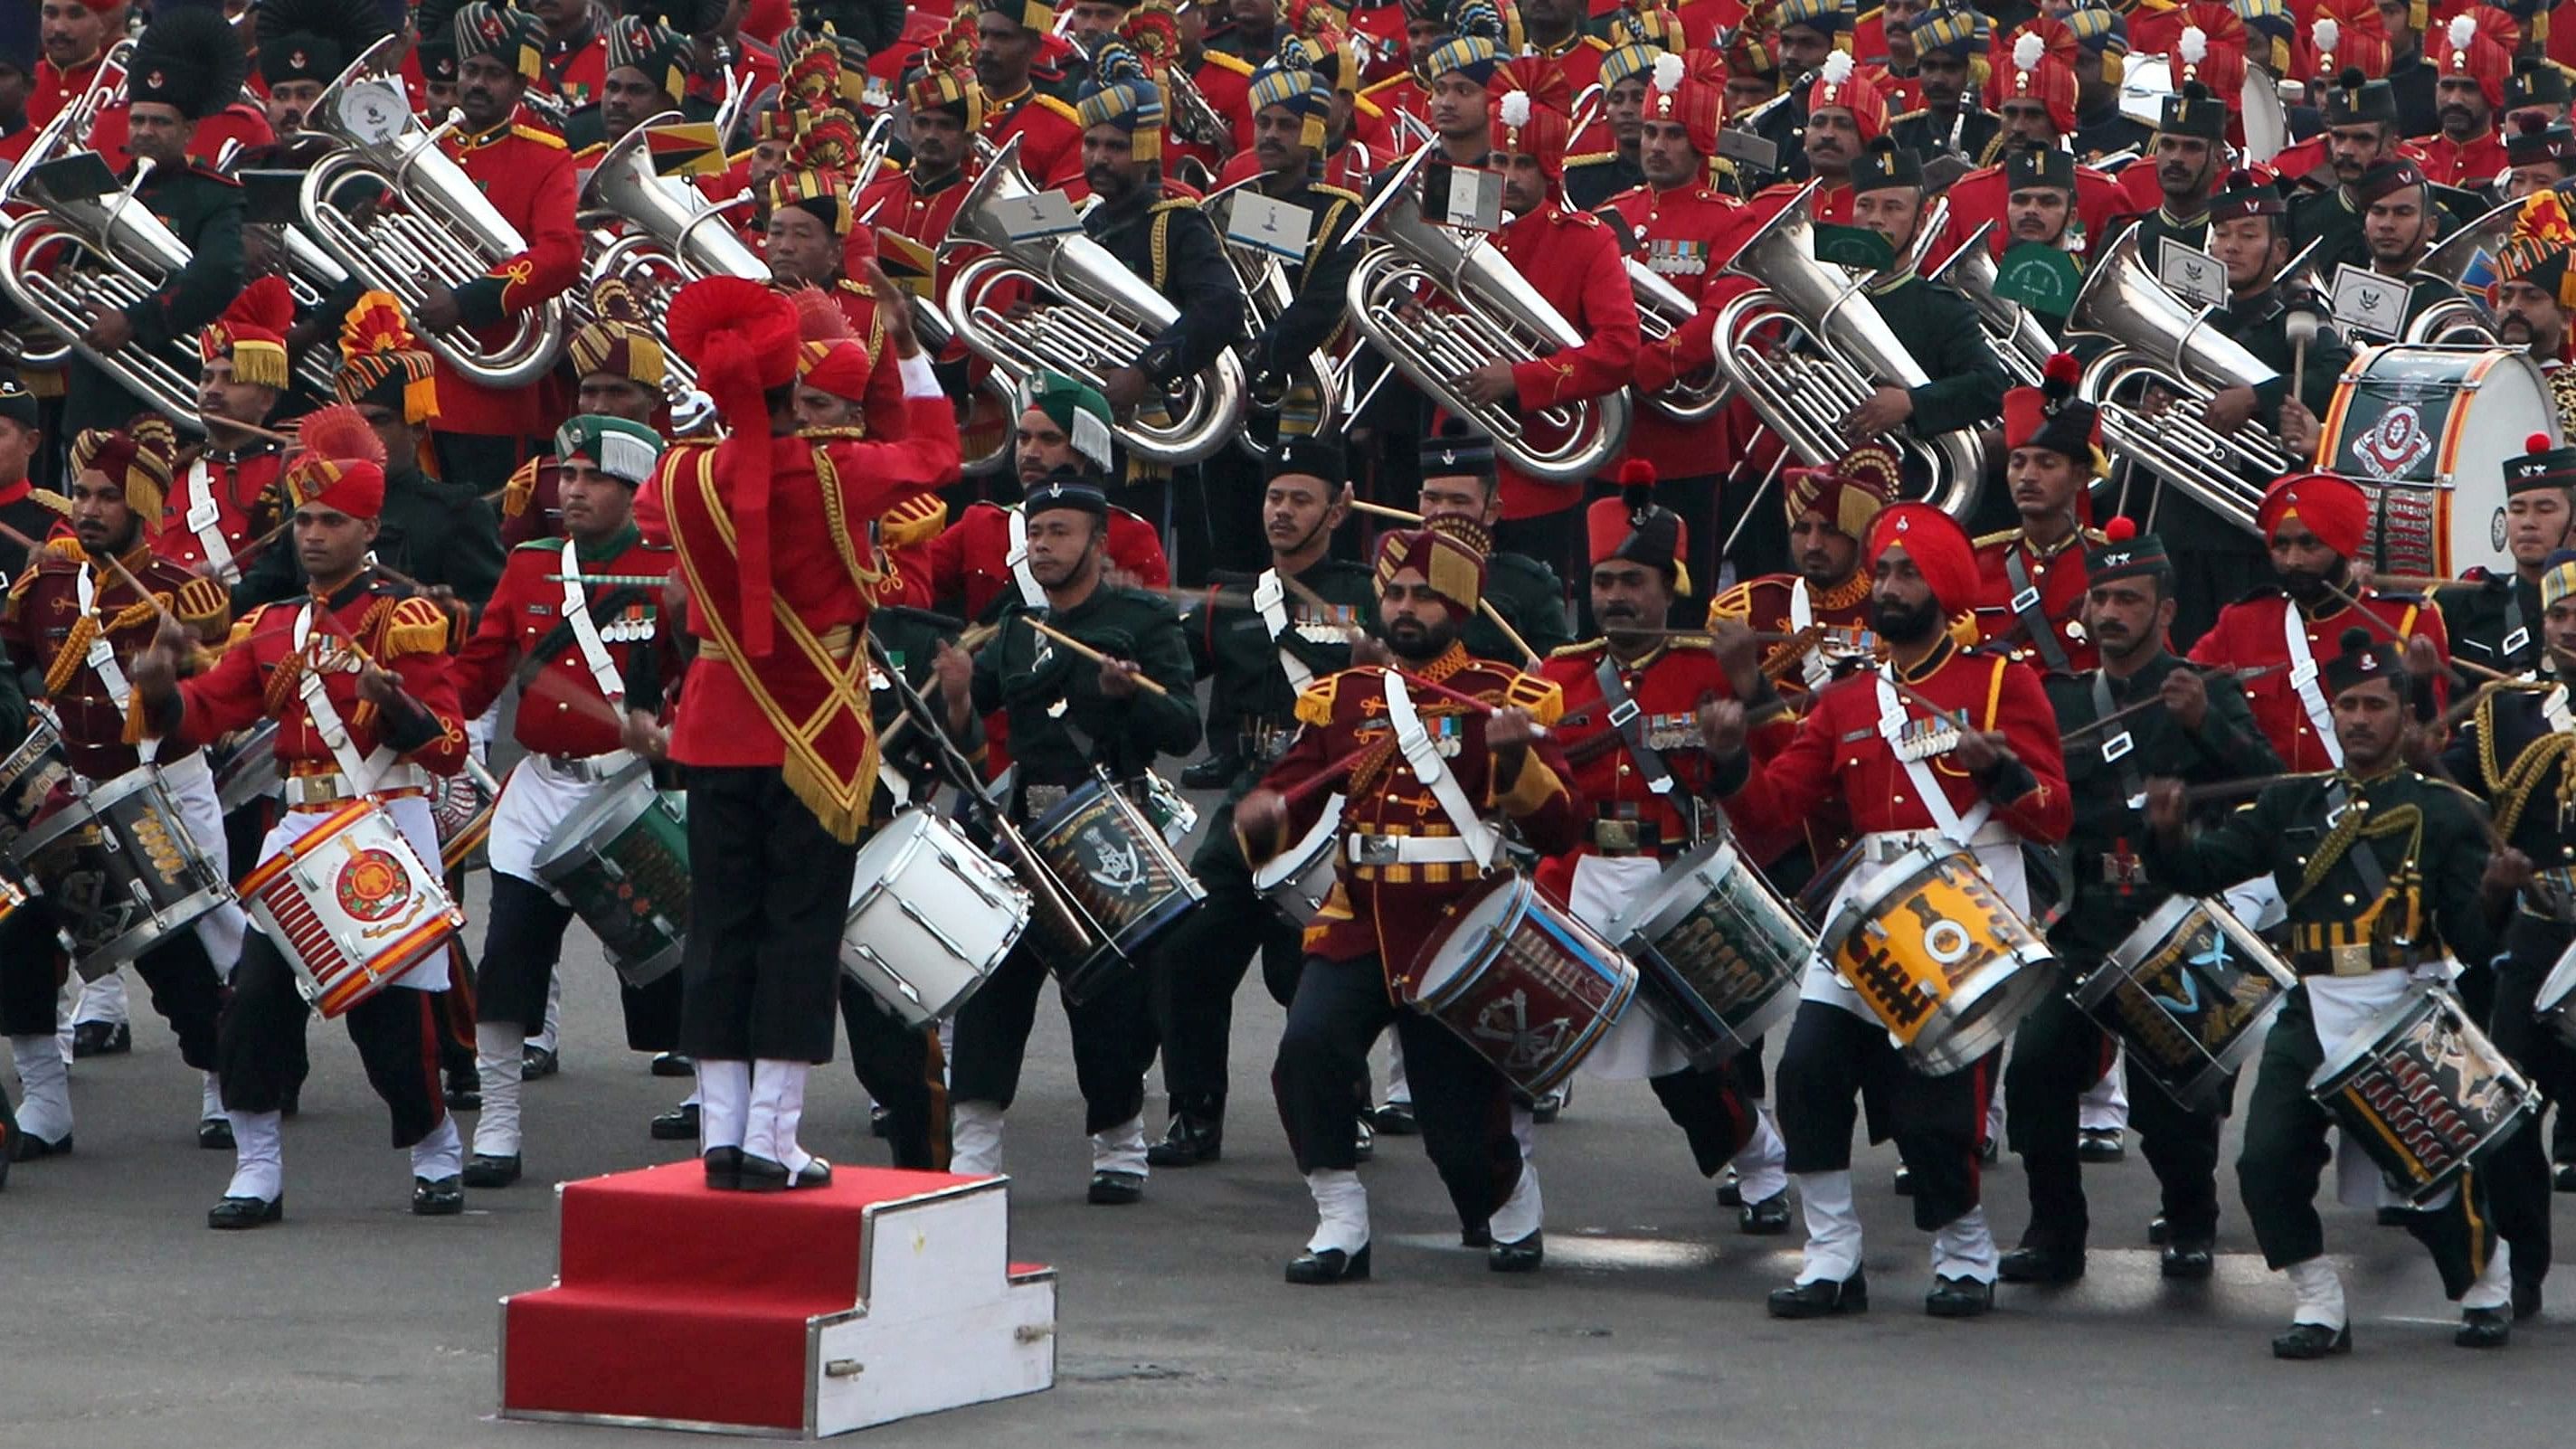 <div class="paragraphs"><p>Army, navy and air force marching bands will play at Vijay Chowk during Beating Retreat ceremony in New Delhi on Jan 29. Representative image.</p></div>